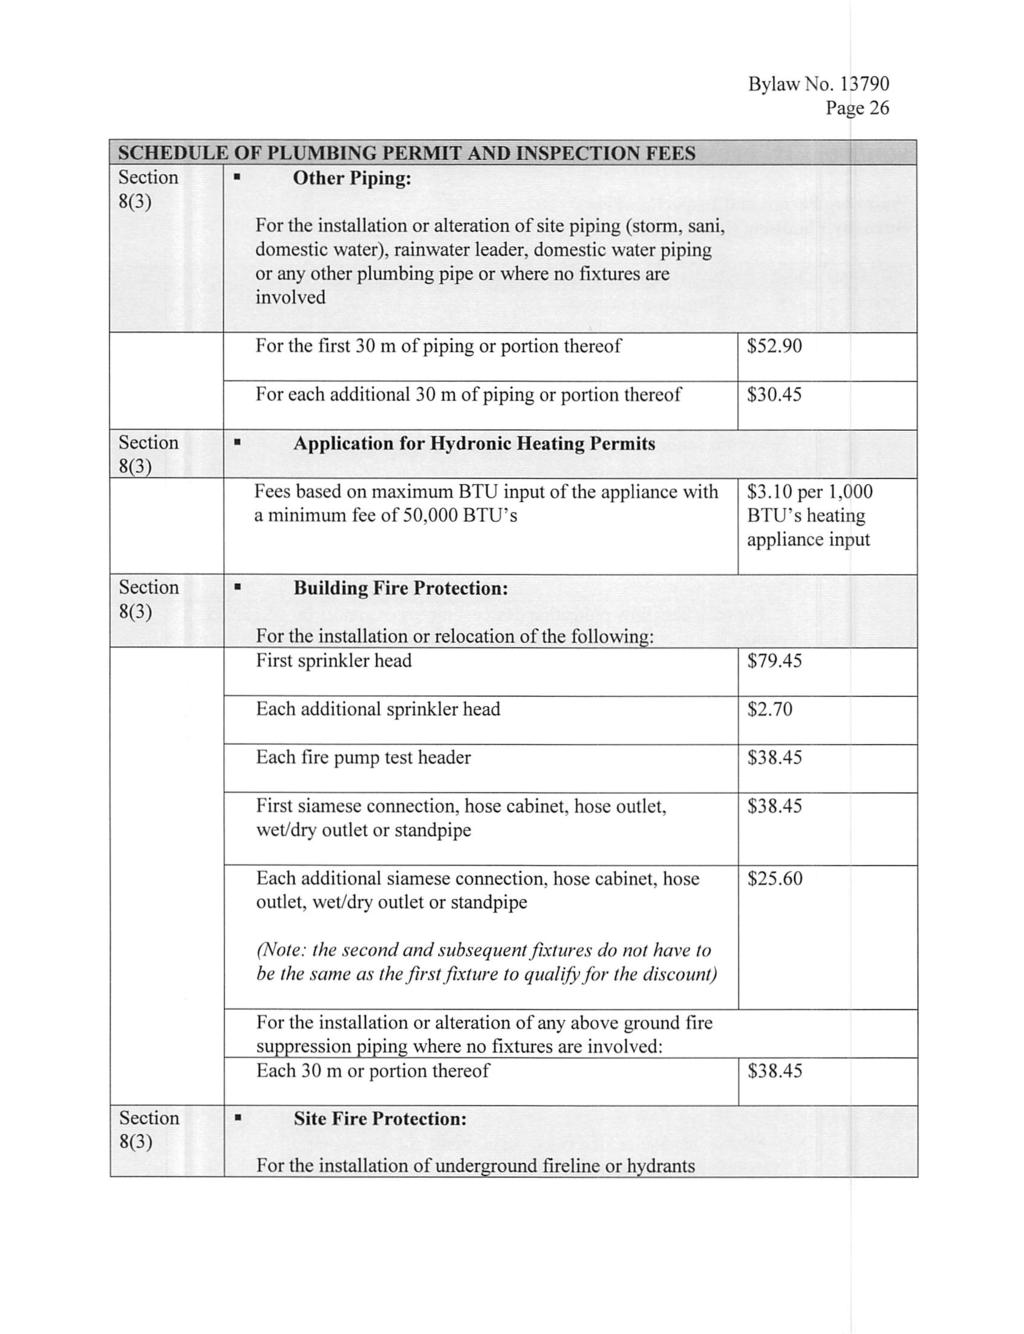 Page 26 SCHEDULE OF PLUMBING PERMIT AND INSPECTION FEES 8(3) Other Piping: For the installation or alteration ofsite piping (storm, sani, domestic water), rainwater leader, domestic water piping or